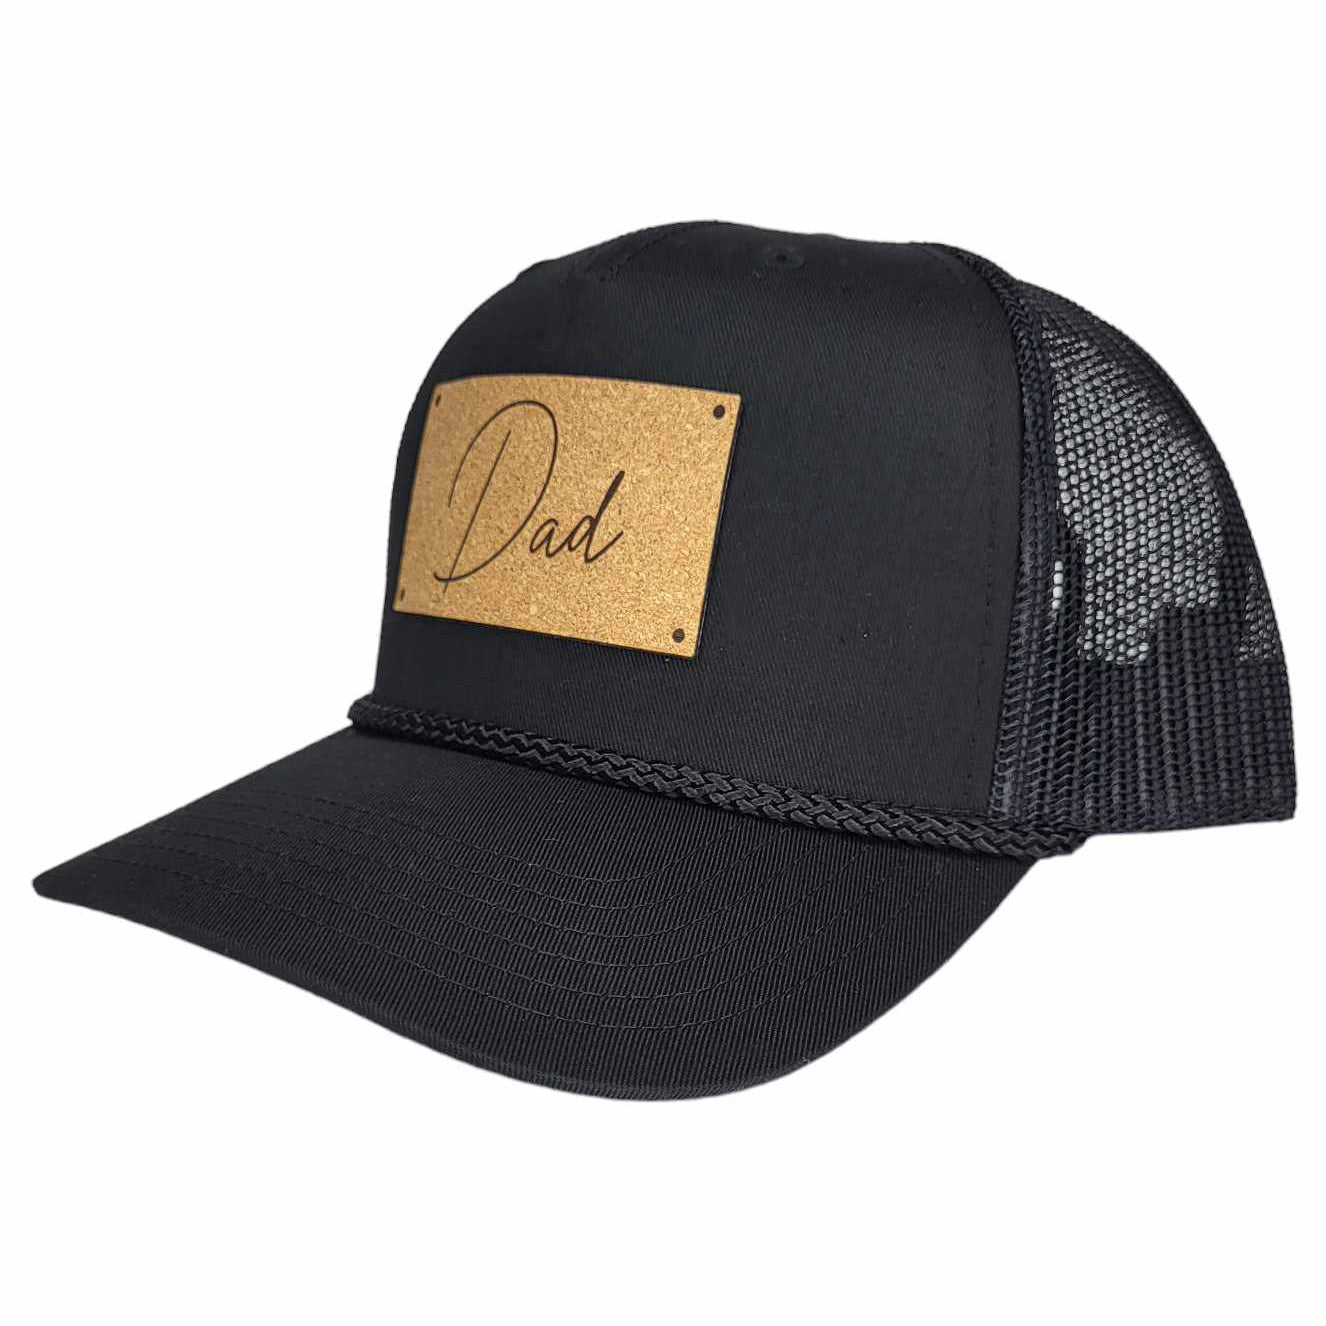 Dad Curved Bill Rope Snapback